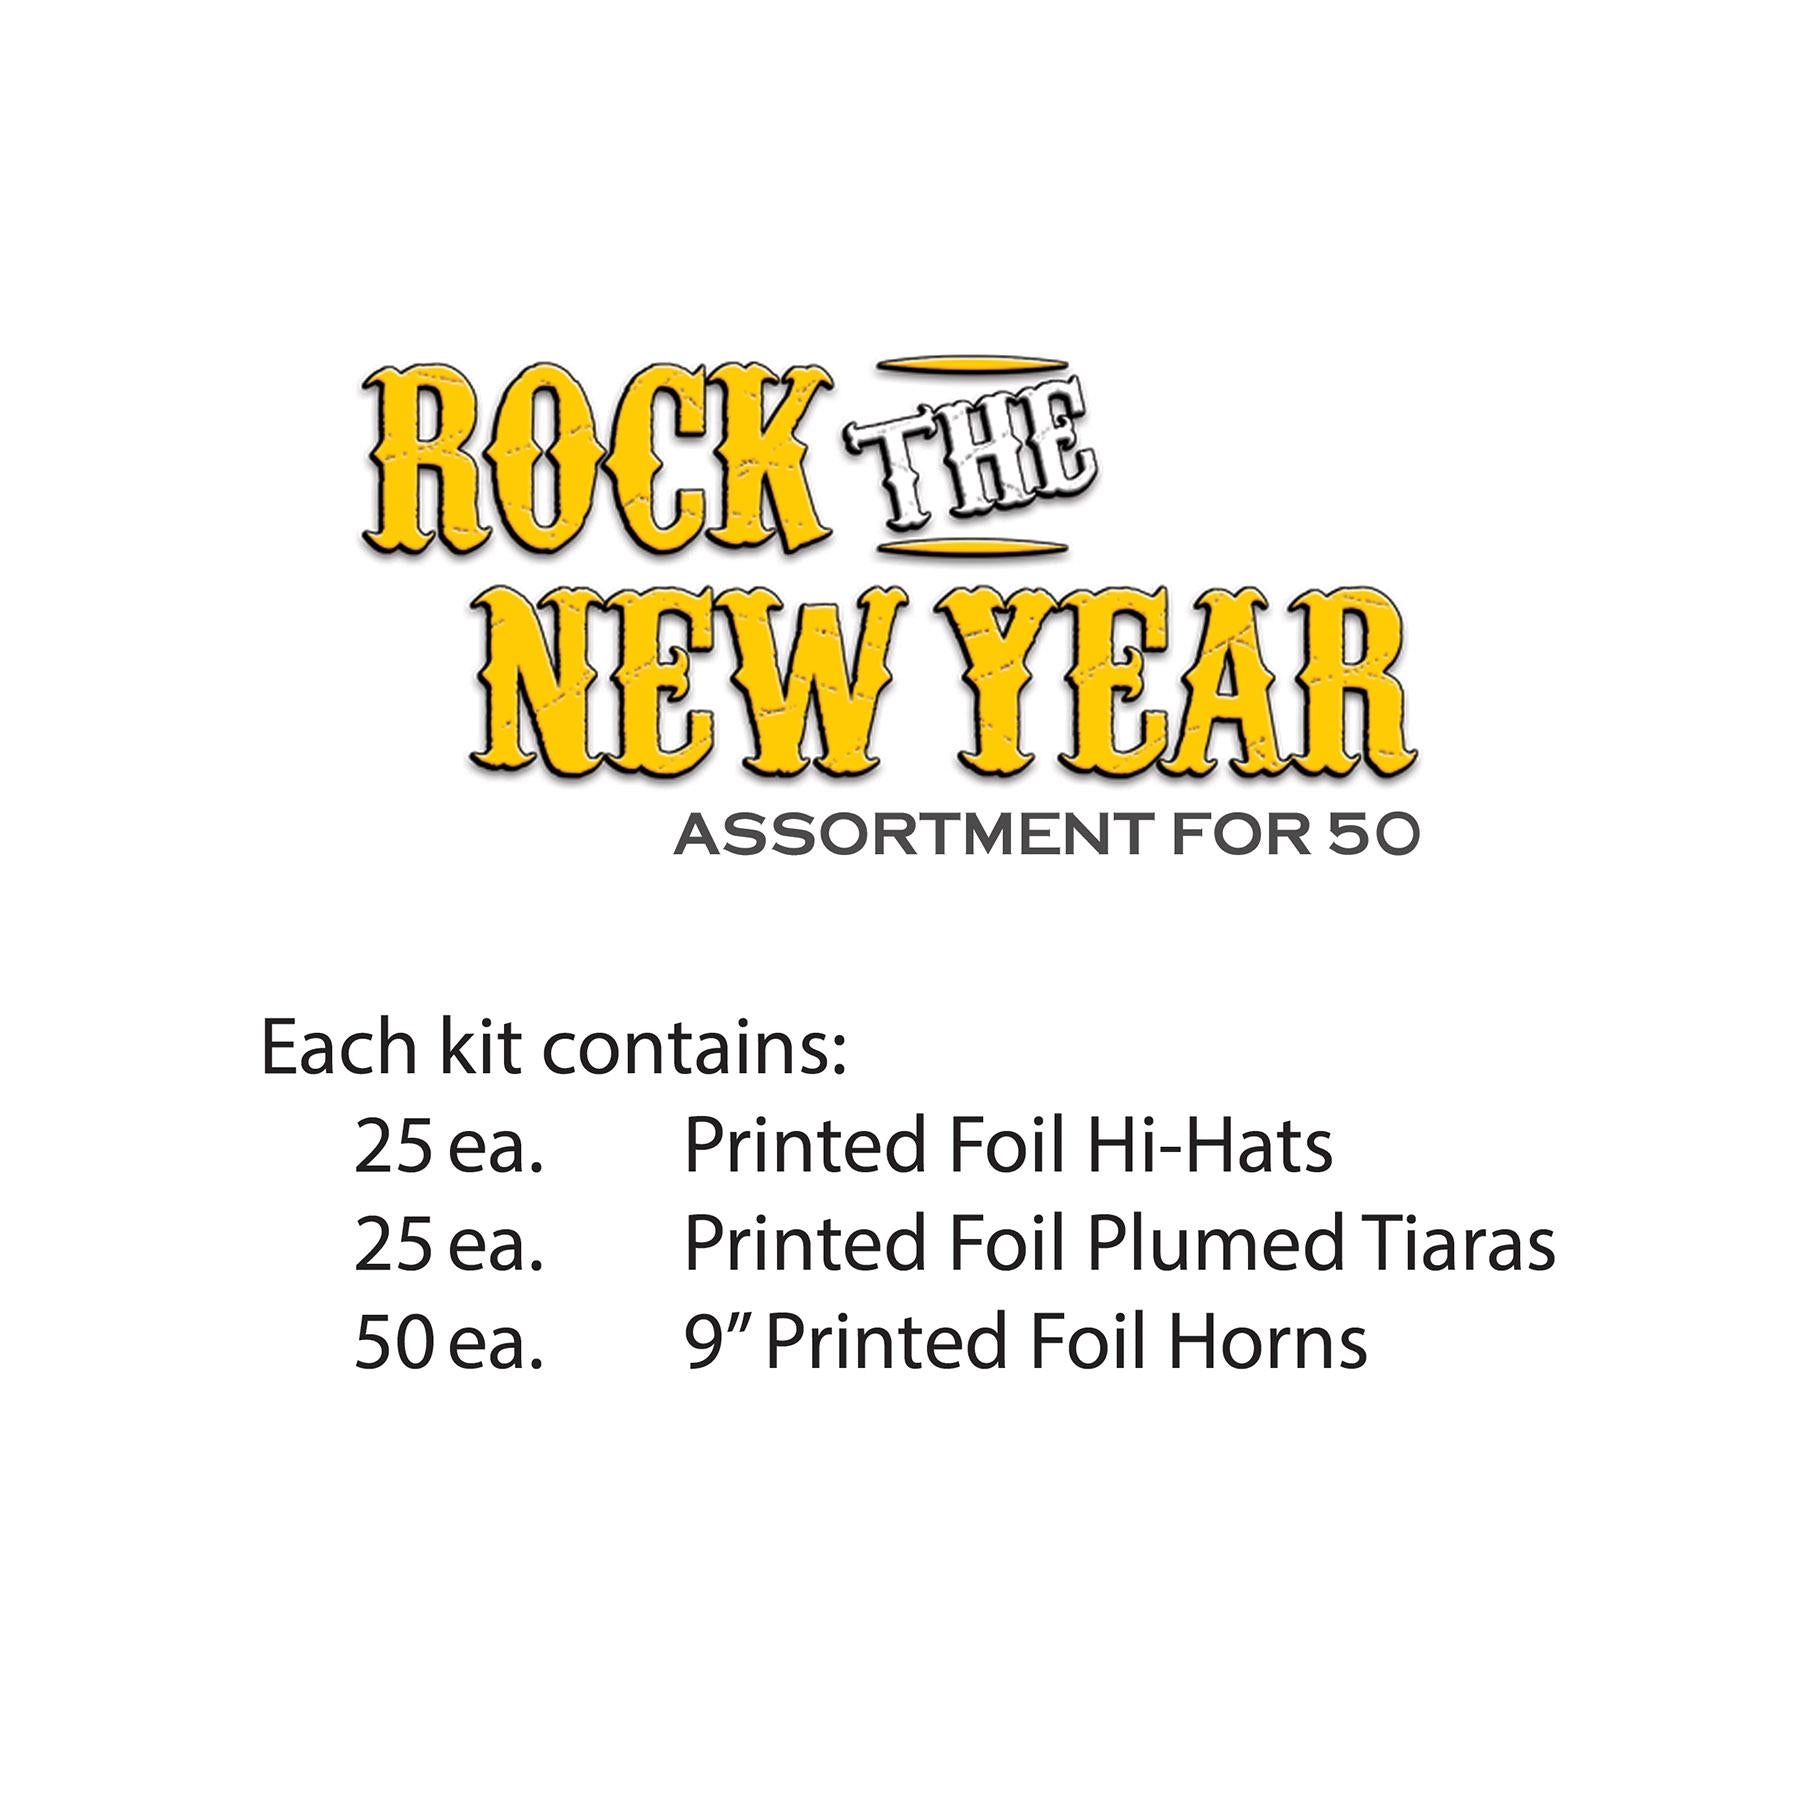 Rock The New Year New Year's Eve Party Kit for 50 People